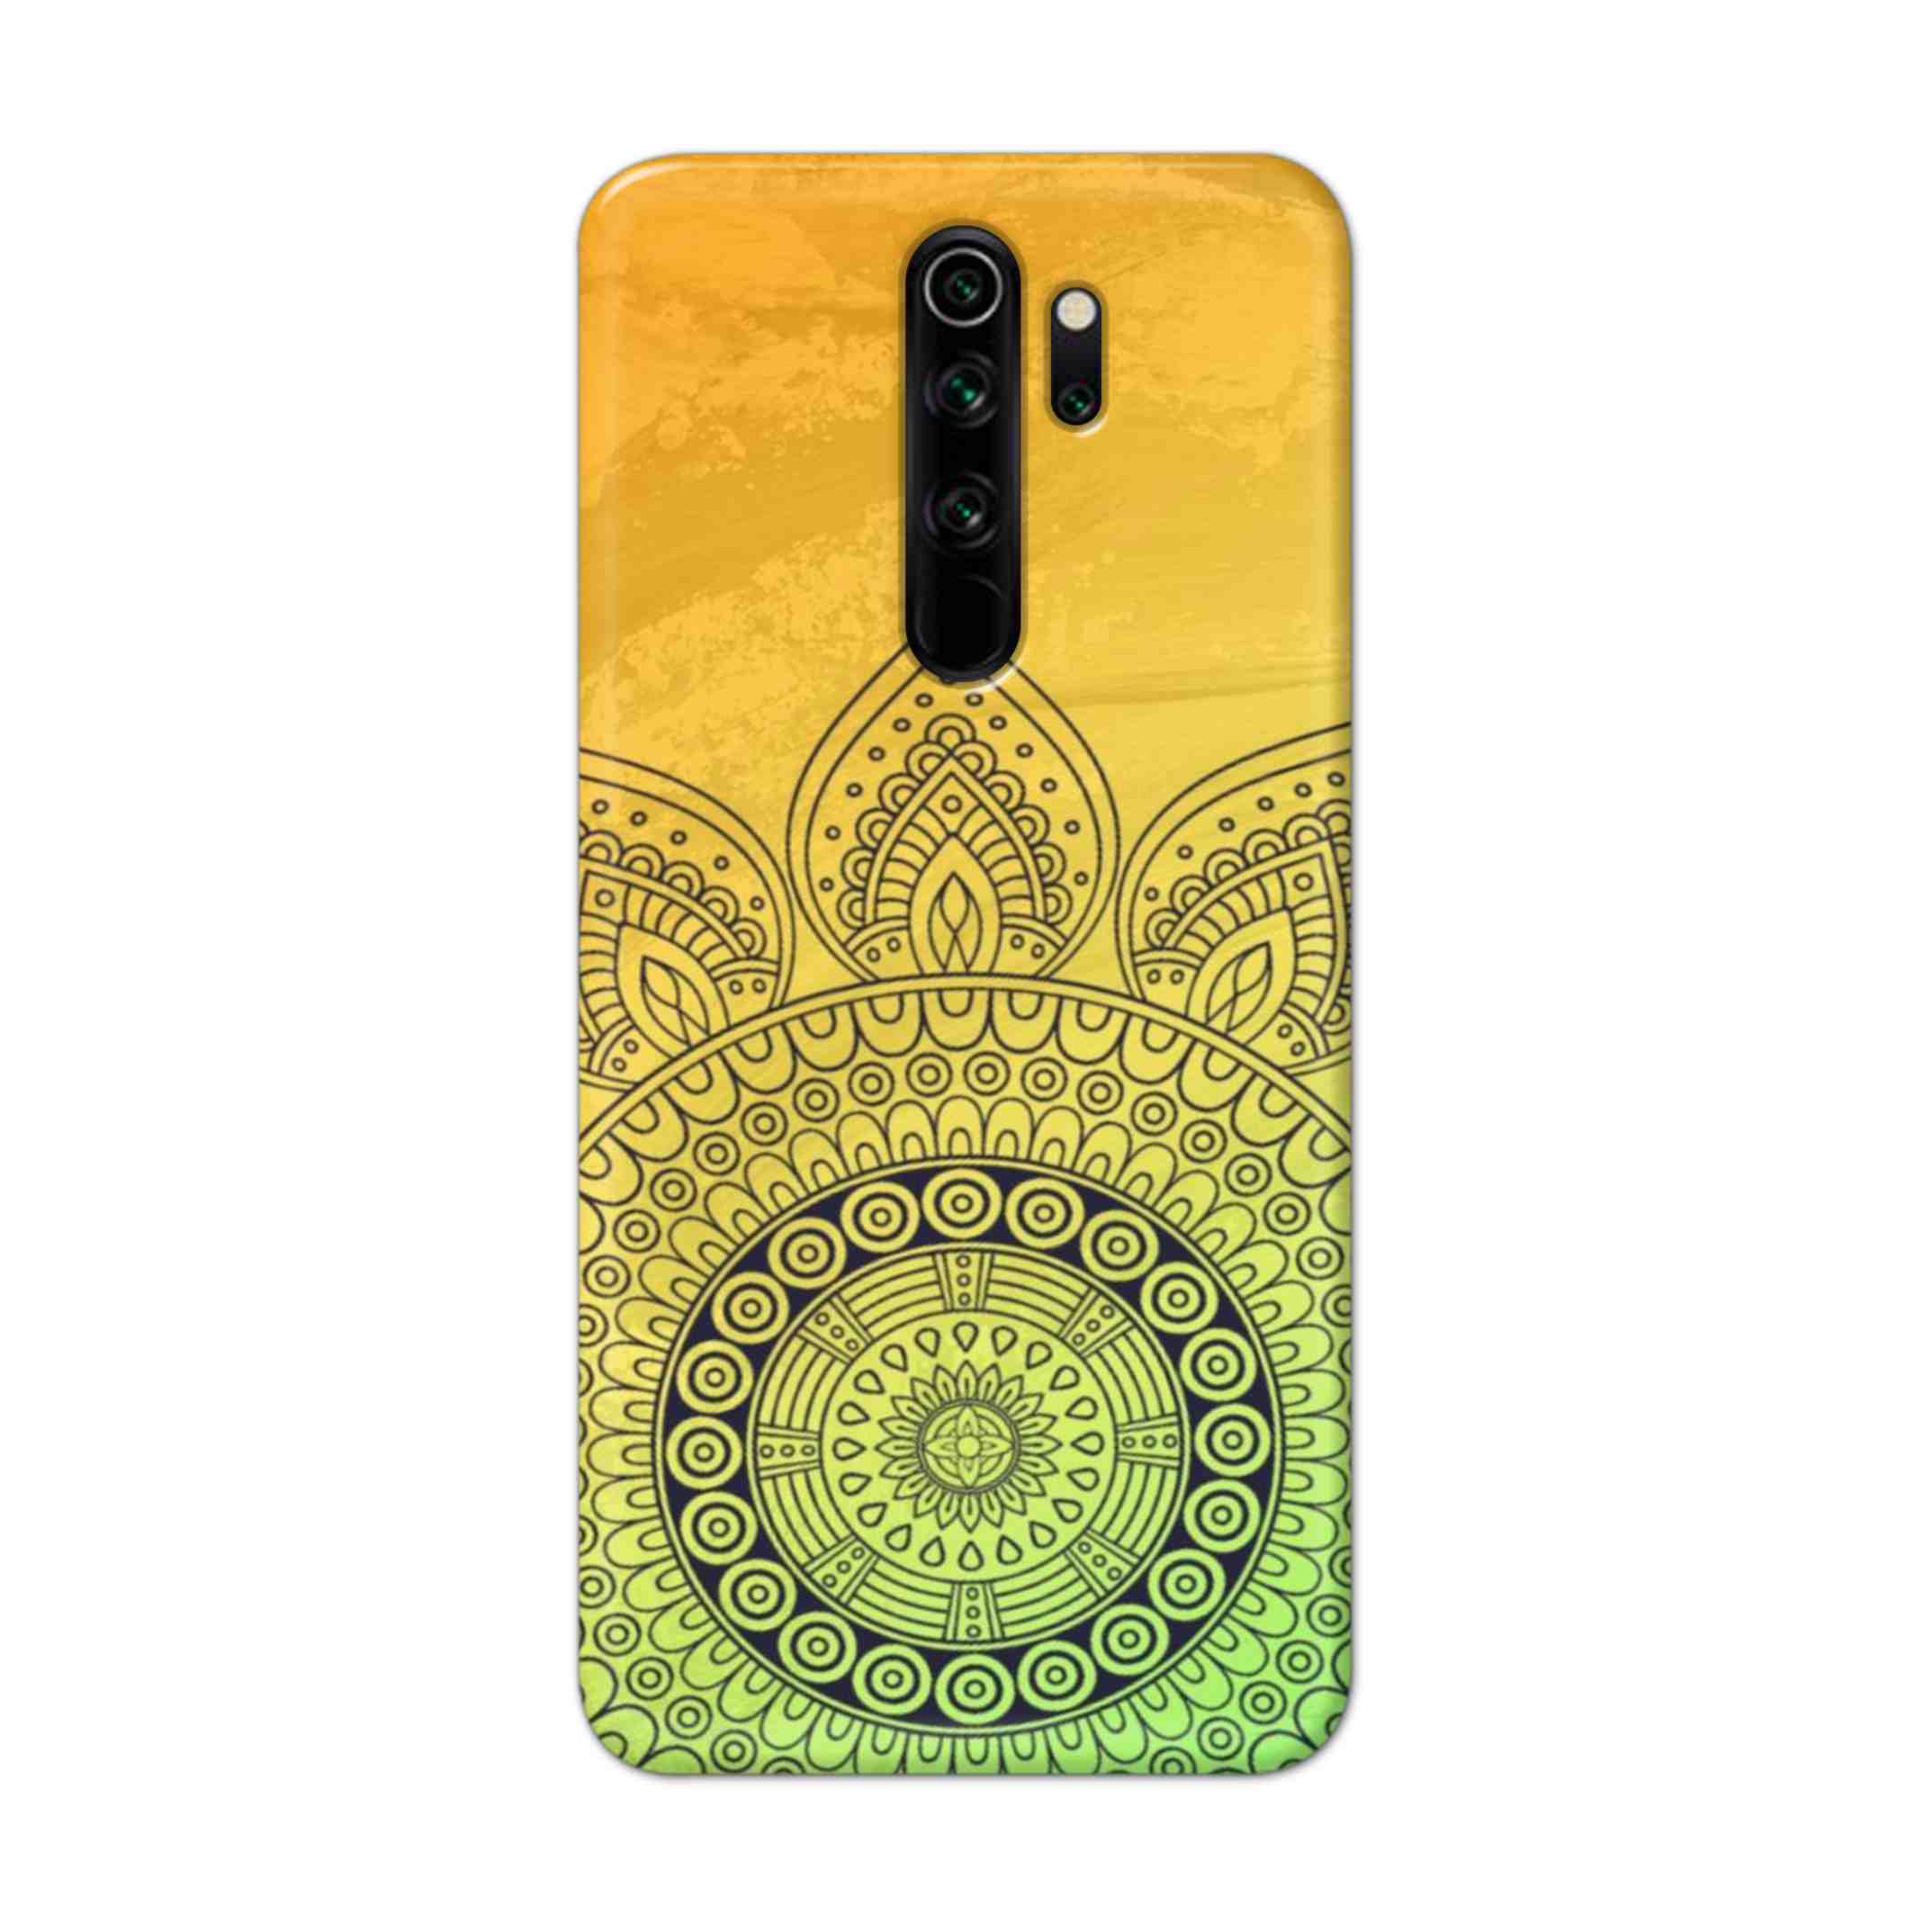 Buy Yellow Rangoli Hard Back Mobile Phone Case Cover For Xiaomi Redmi Note 8 Pro Online